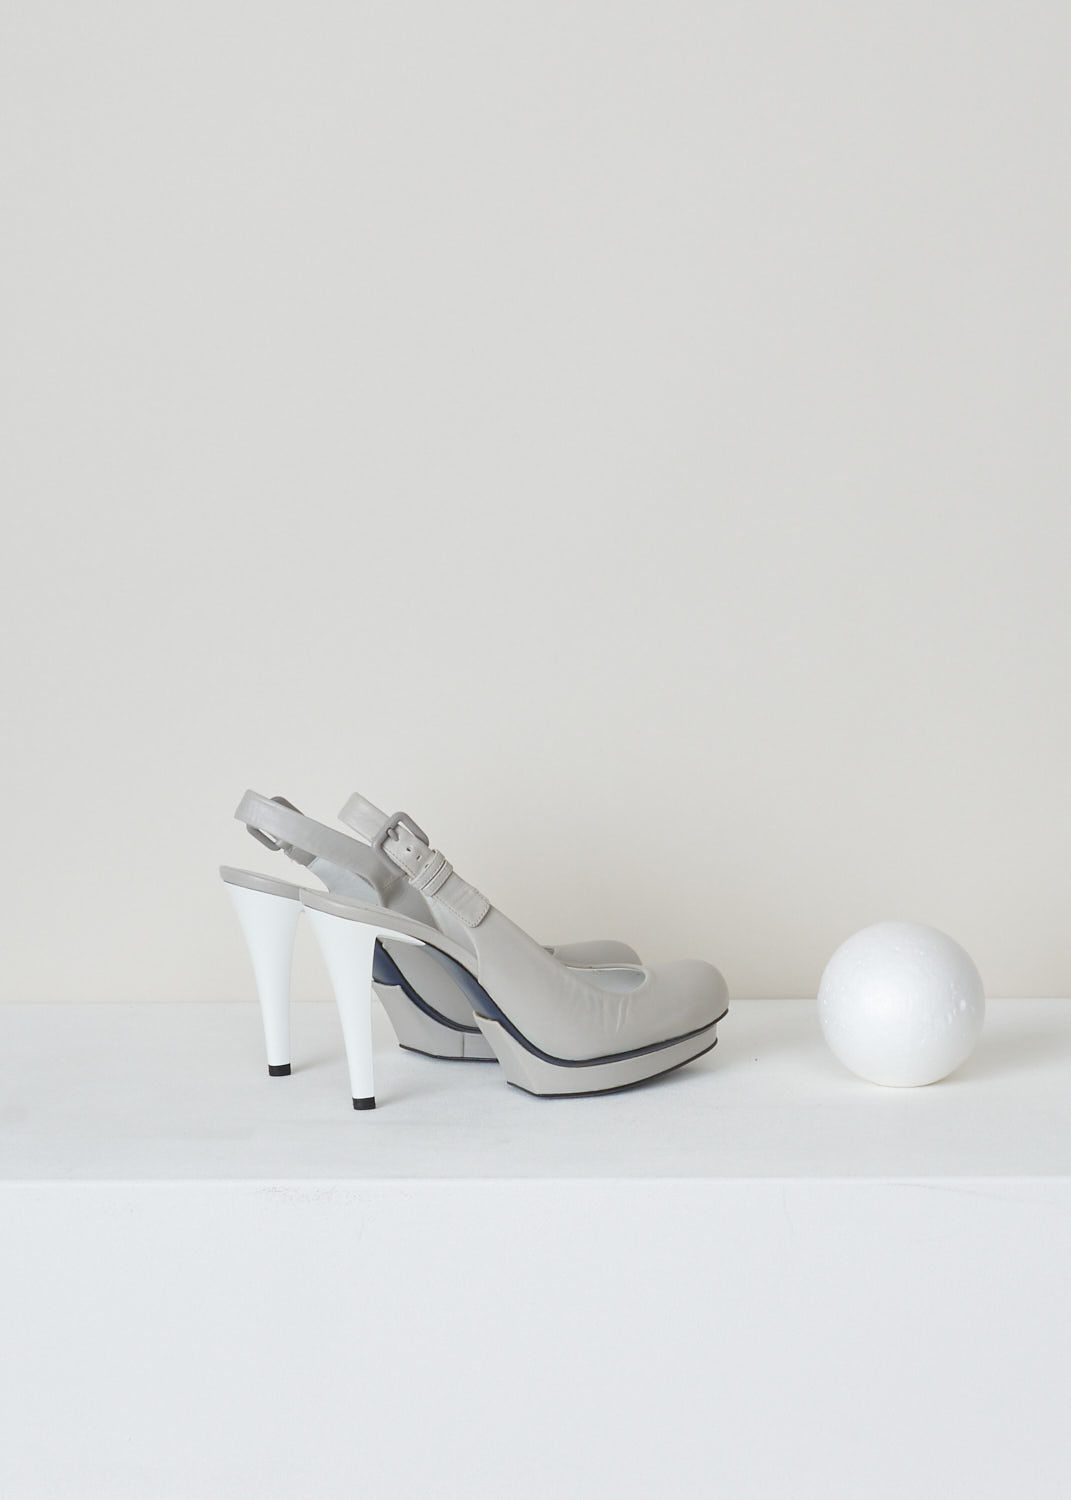 Jil Sanders, Slingback platform pumps in grey, JS22026_9A2M7_talco_807_polvere, grey, back, Lovely slingbacks pumps made with a platform underneath to spice it up a bit. fastening option being the buckle on the back.

Heel Height: 9 cm / 3.5 inch.  